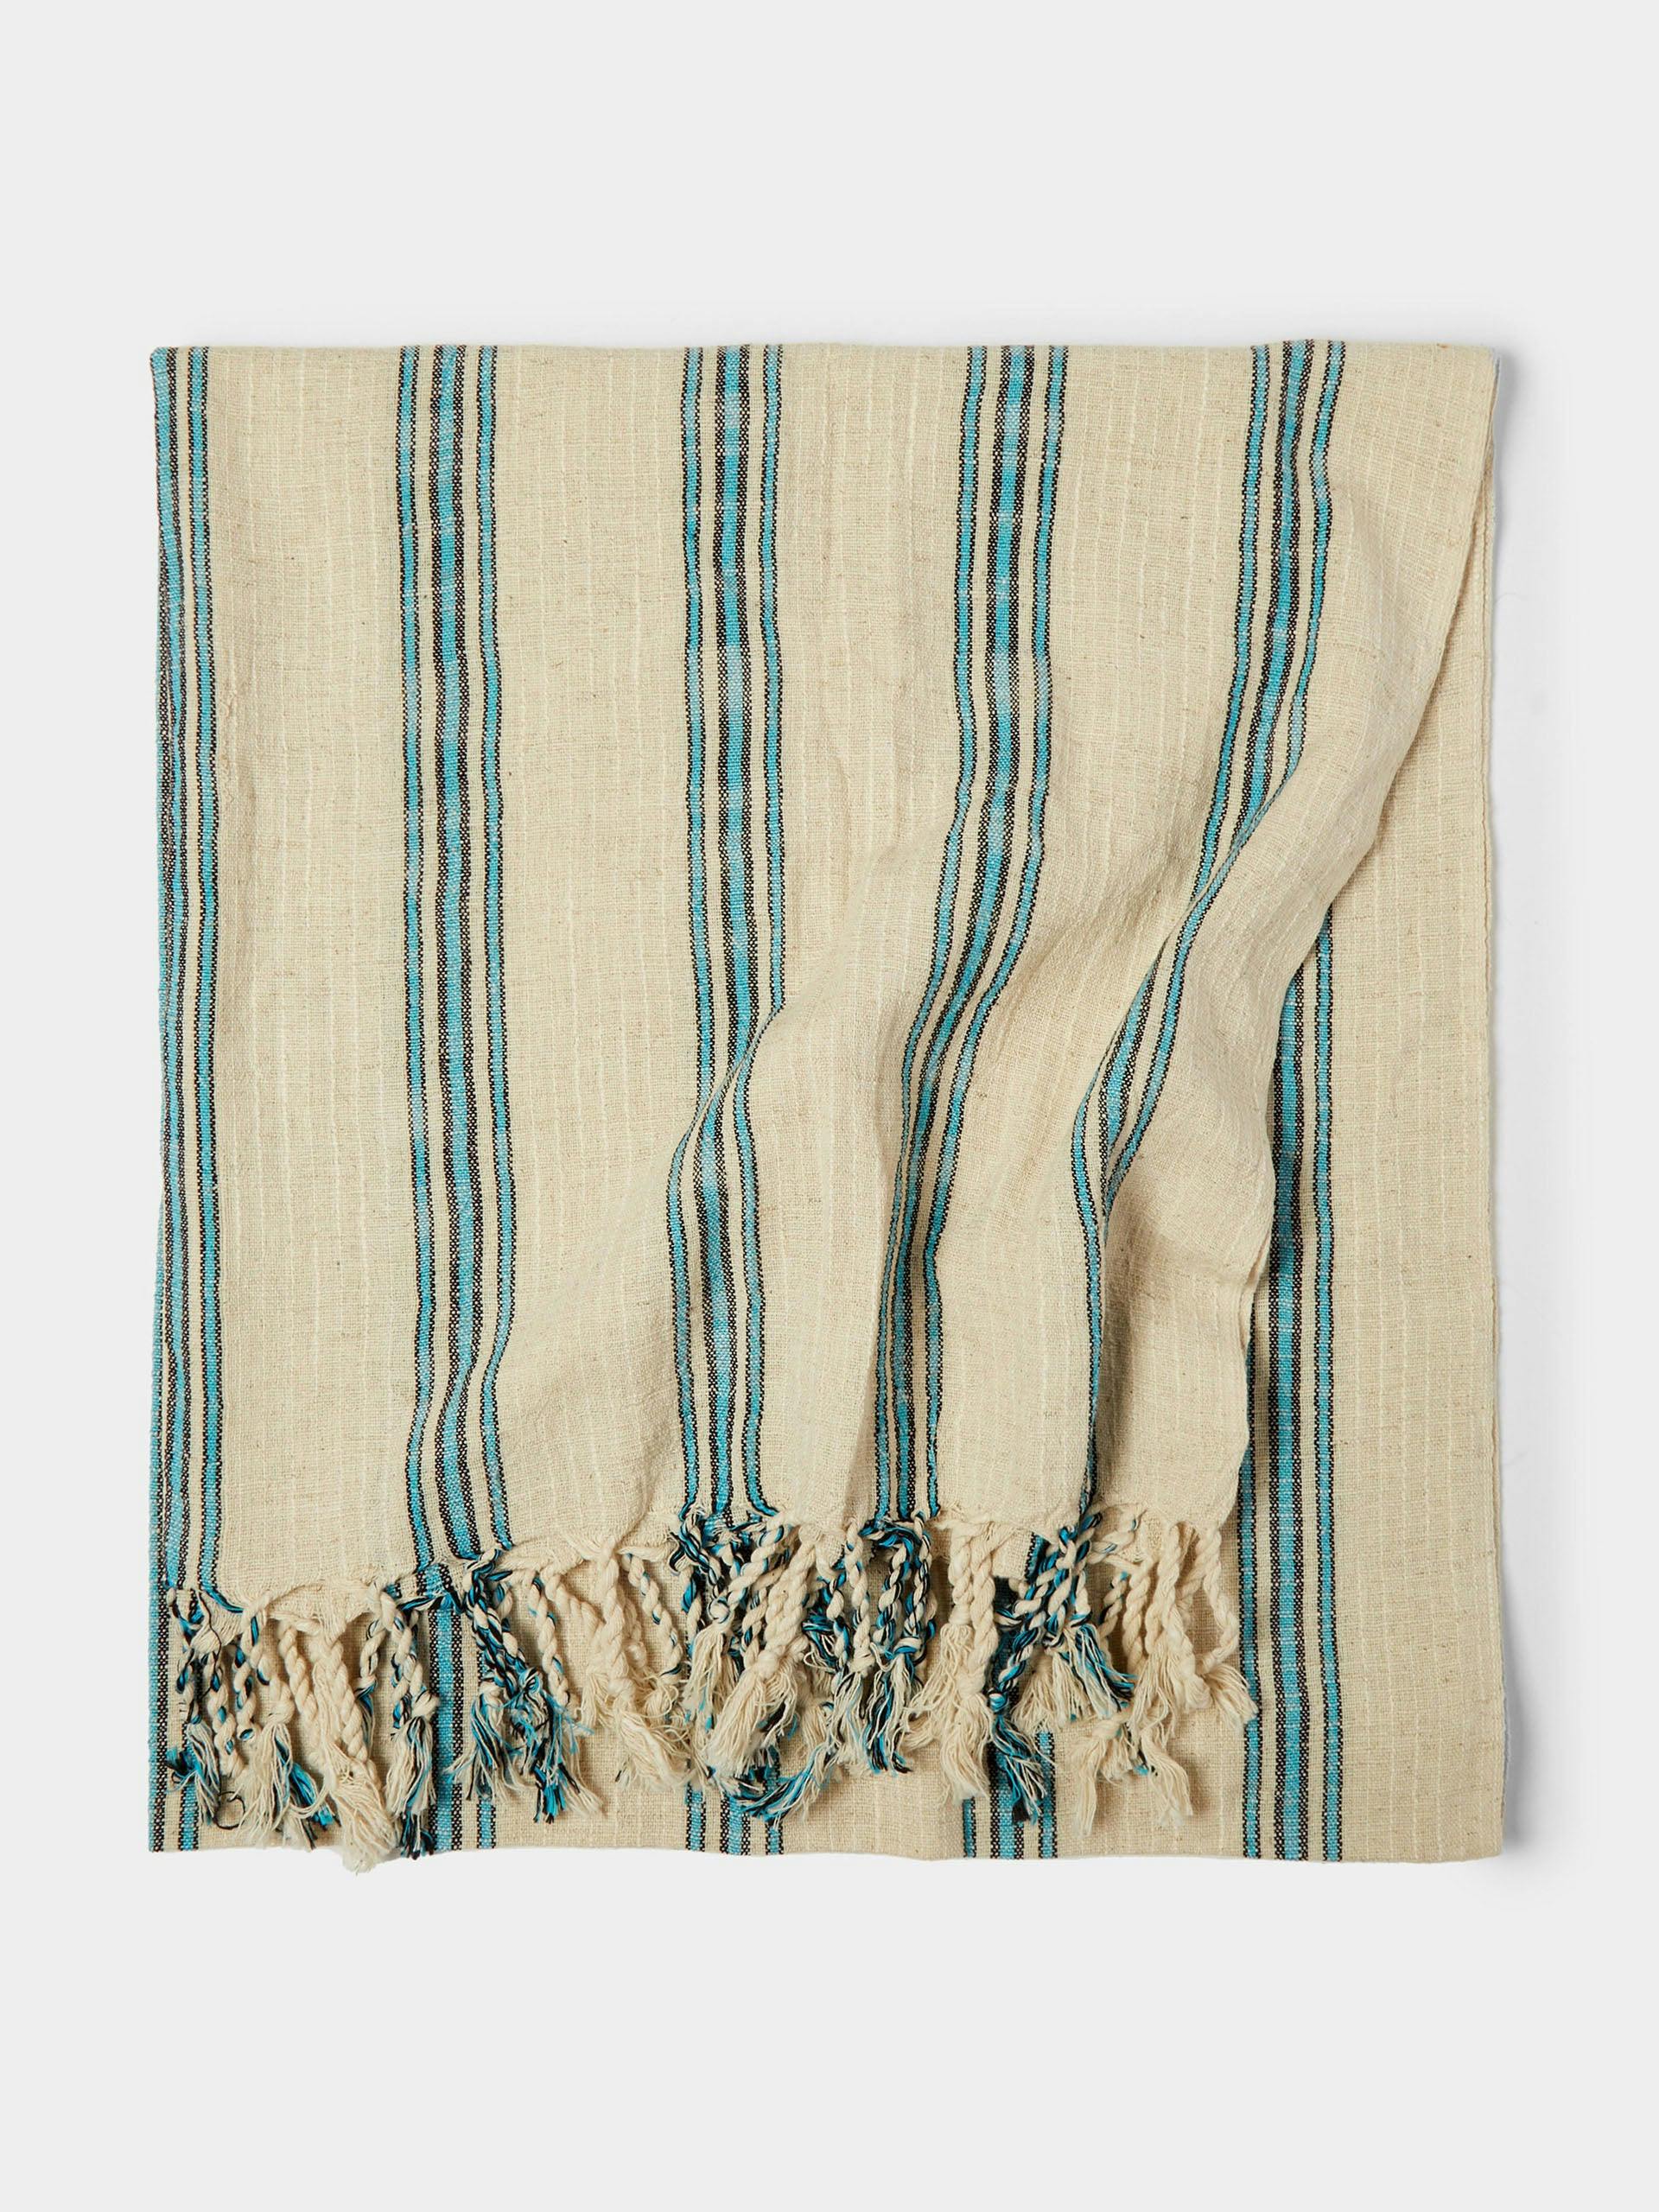 Turquoise handwoven cotton and linen towels (set of 2)